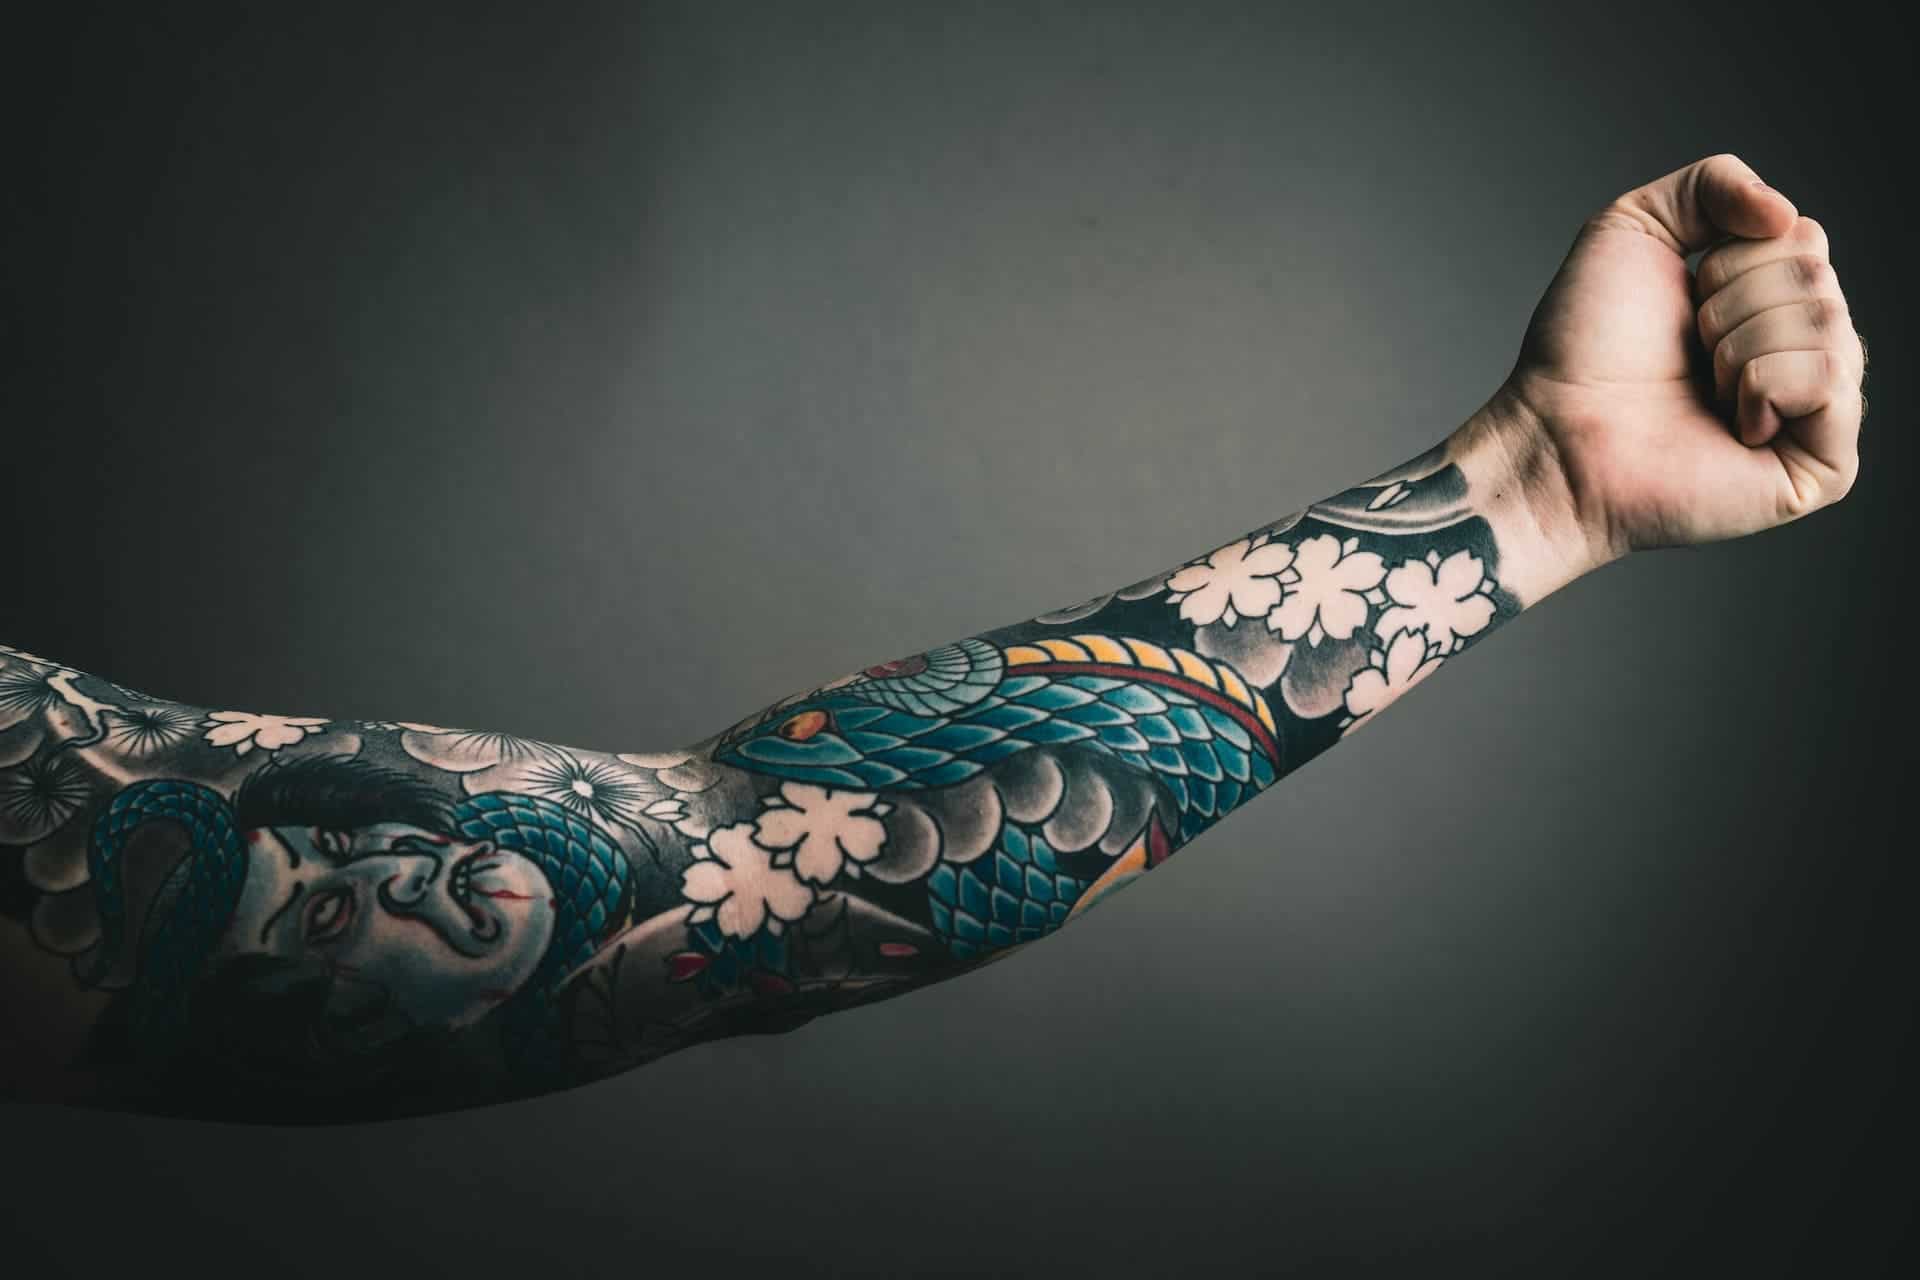 Nanoparticles from tattoos can travel to the lymph nodes